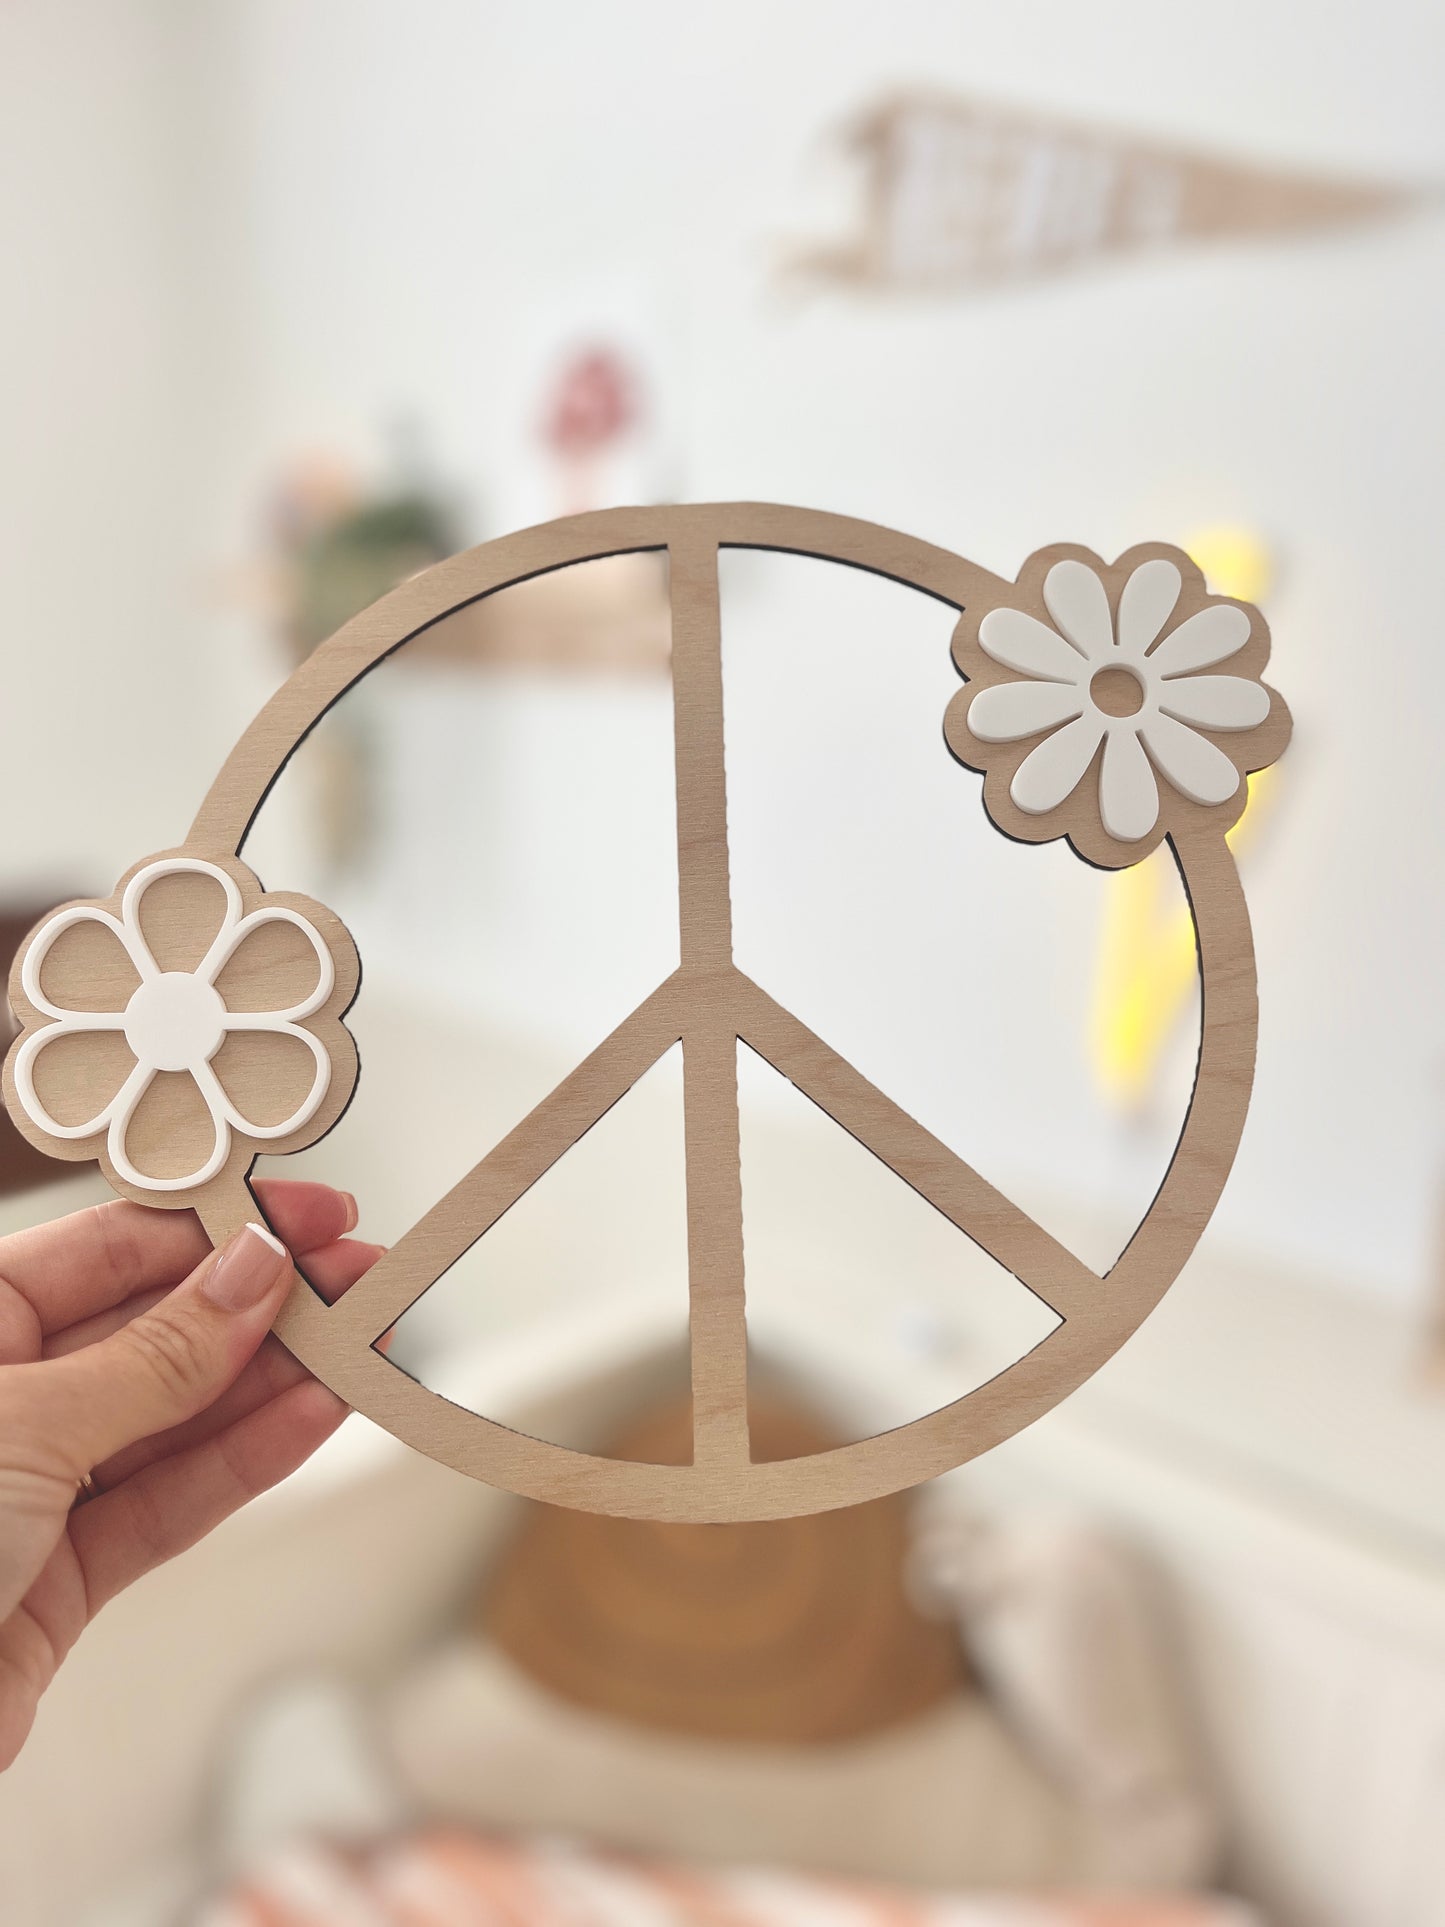 Peace and flowers sign